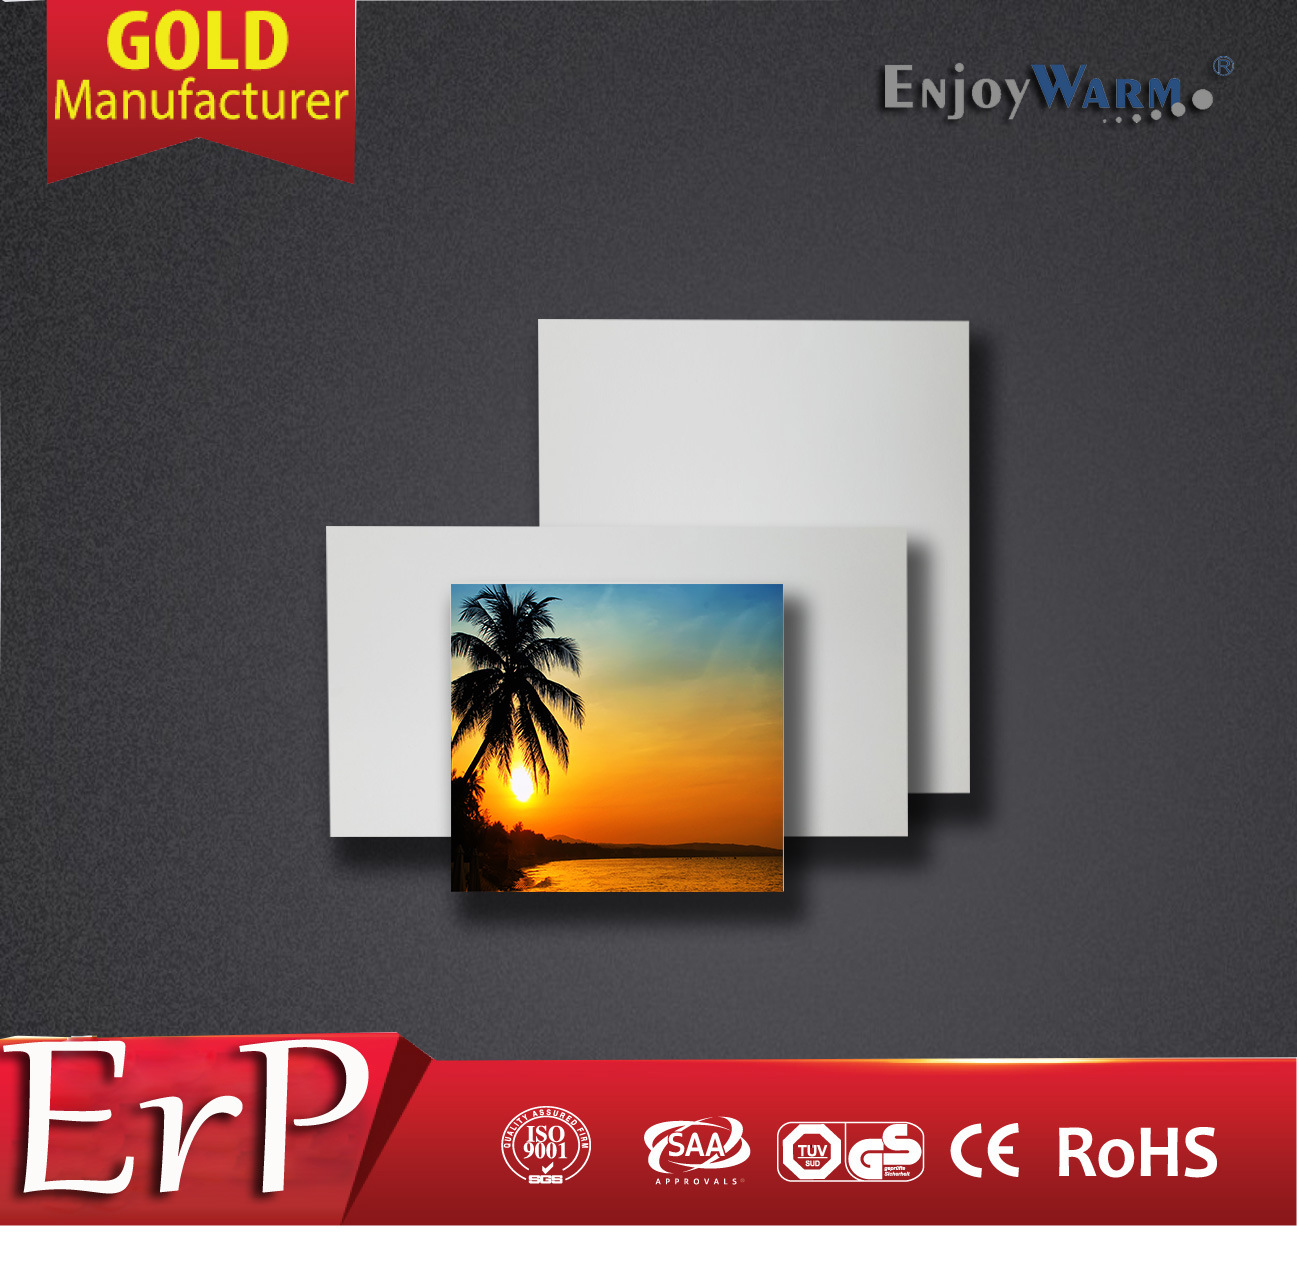 ERP Lot20 TUV GS Ce RoHS SAA ISO9001 IP54 Aluminum Surface Best Price 12V 24V Heating Film